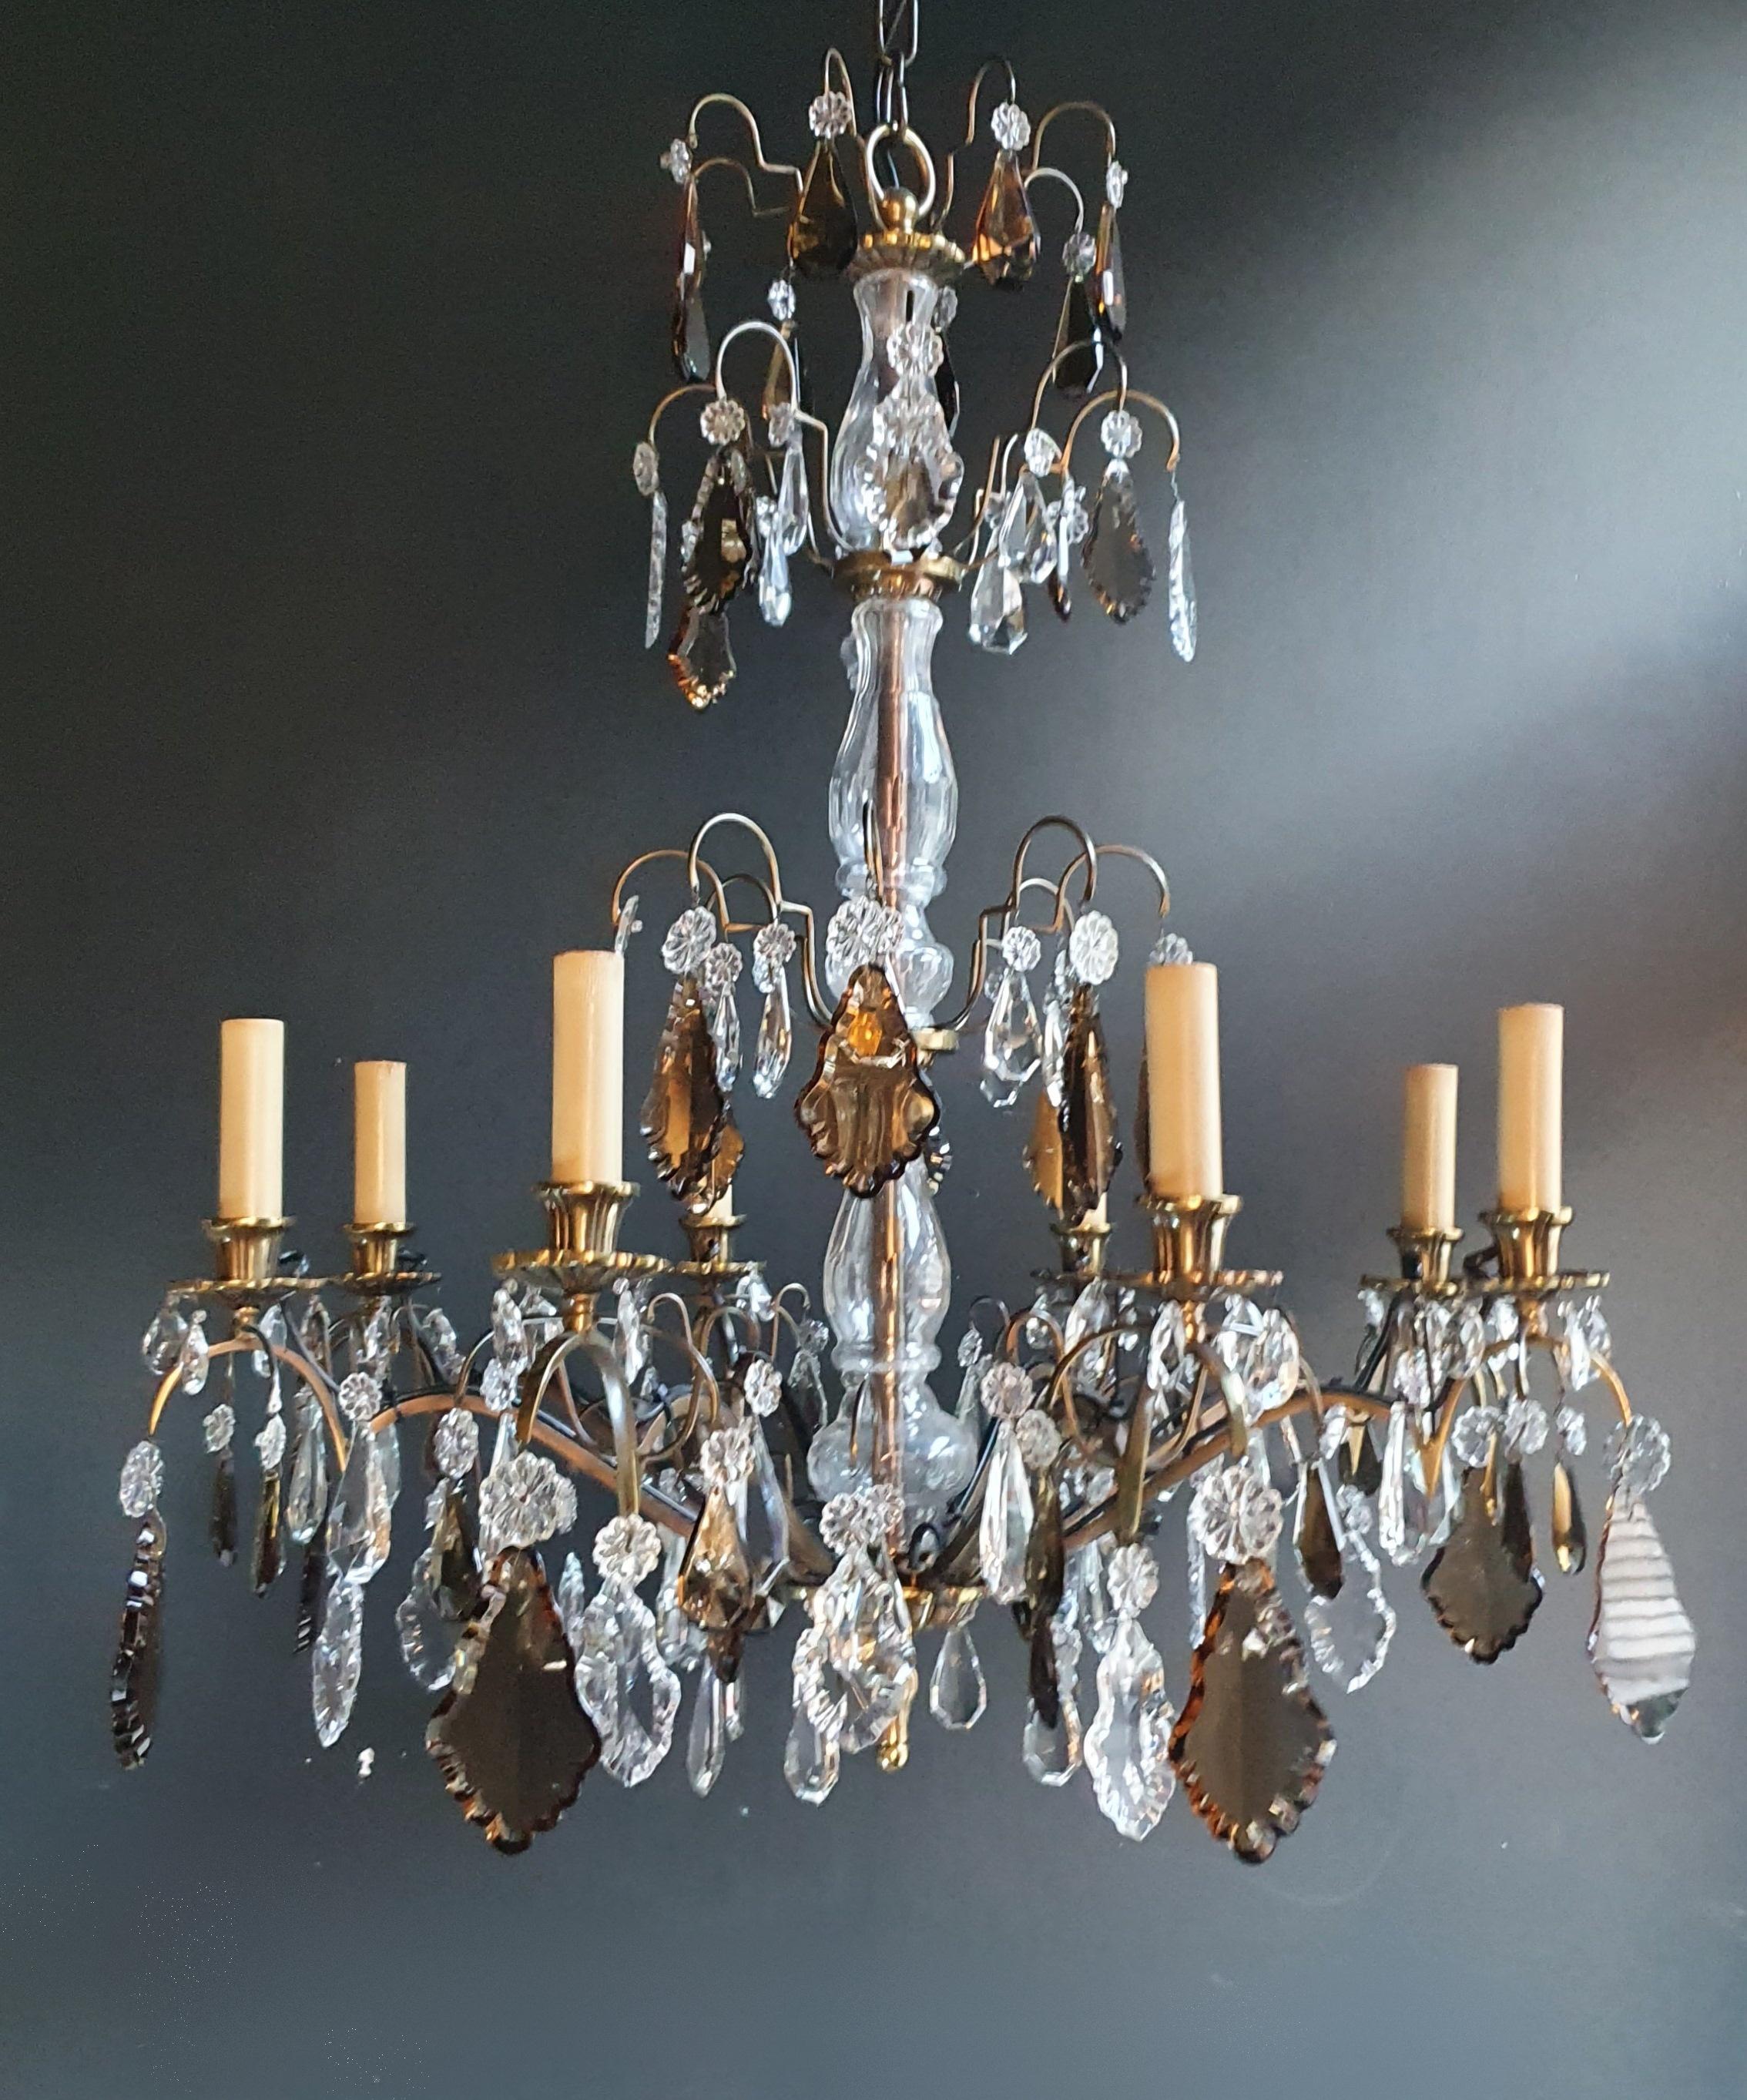 Introducing an exquisite Shades Chandelier crafted with Crystal Glass and adorned with a captivating Candelabrum Brass Bronze Antique Luis Art design. This old chandelier has been lovingly and professionally restored in Berlin, and its electrical